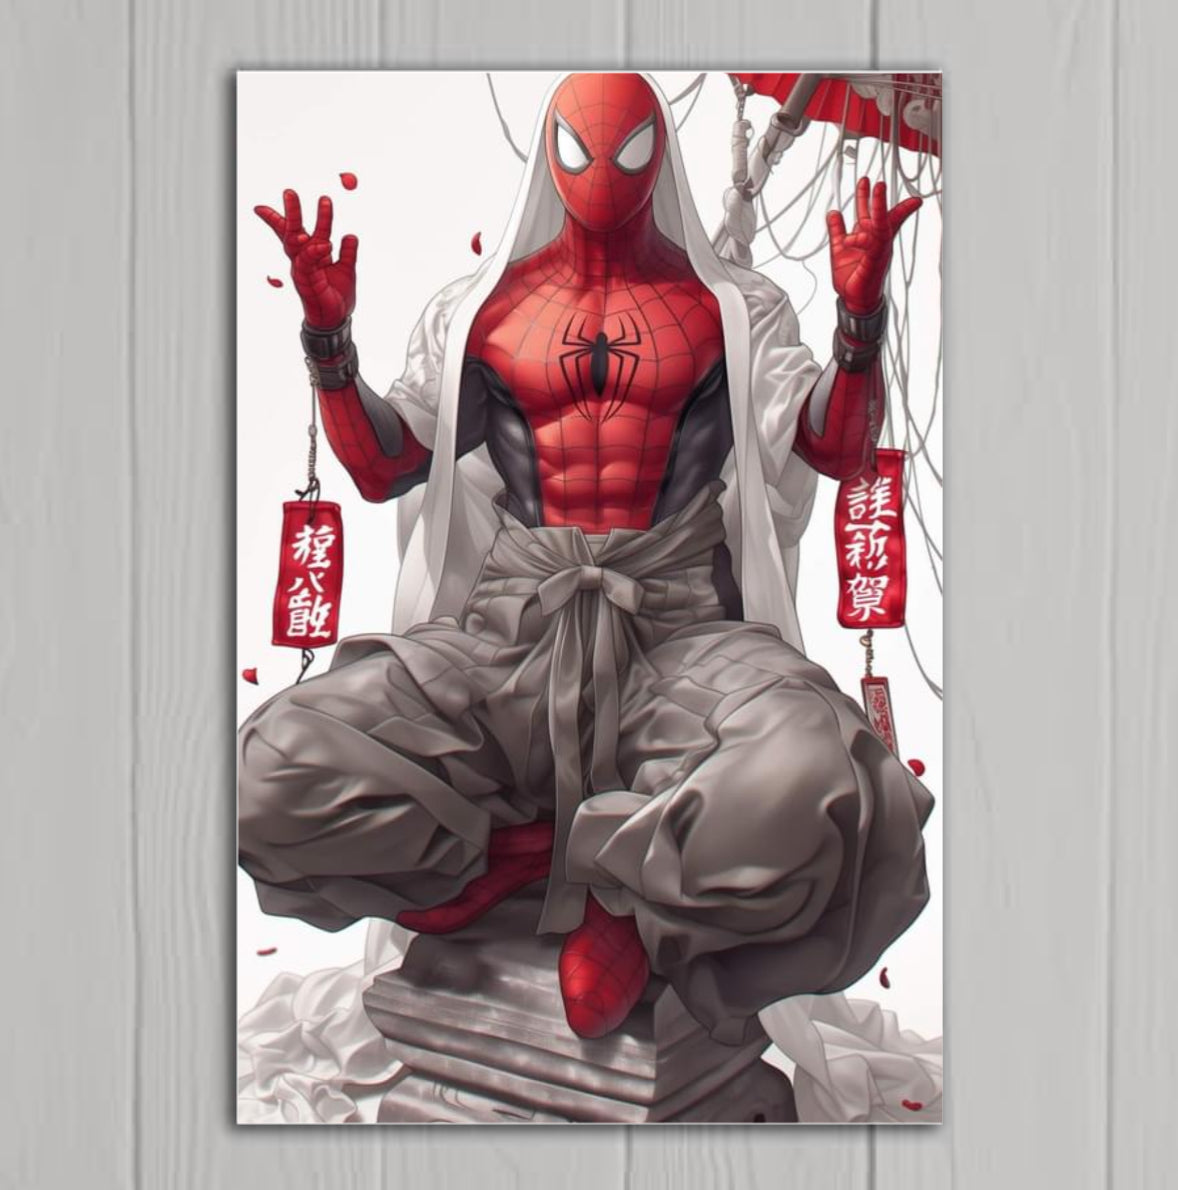 Spider-Man is a superhero appearing in American comic books published by Marvel Comics. Created by writer-editor Stan Lee and artist Steve Ditko, he first appeared in the anthology comic book Amazing Fantasy #15 in the Silver Age of Comic Books